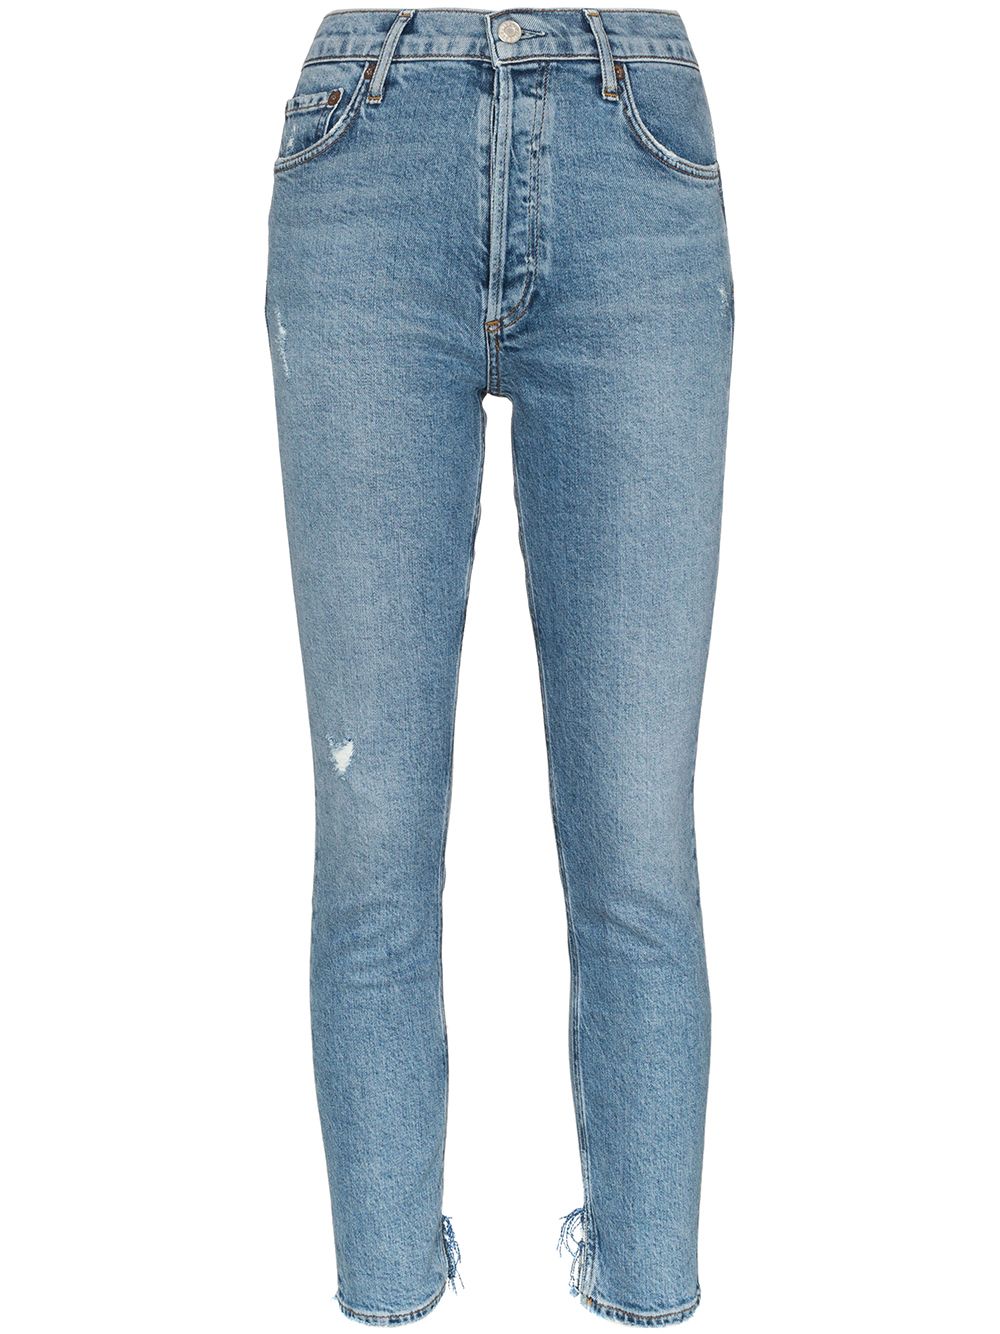 AGOLDE CROPPED DISTRESSED JEANS